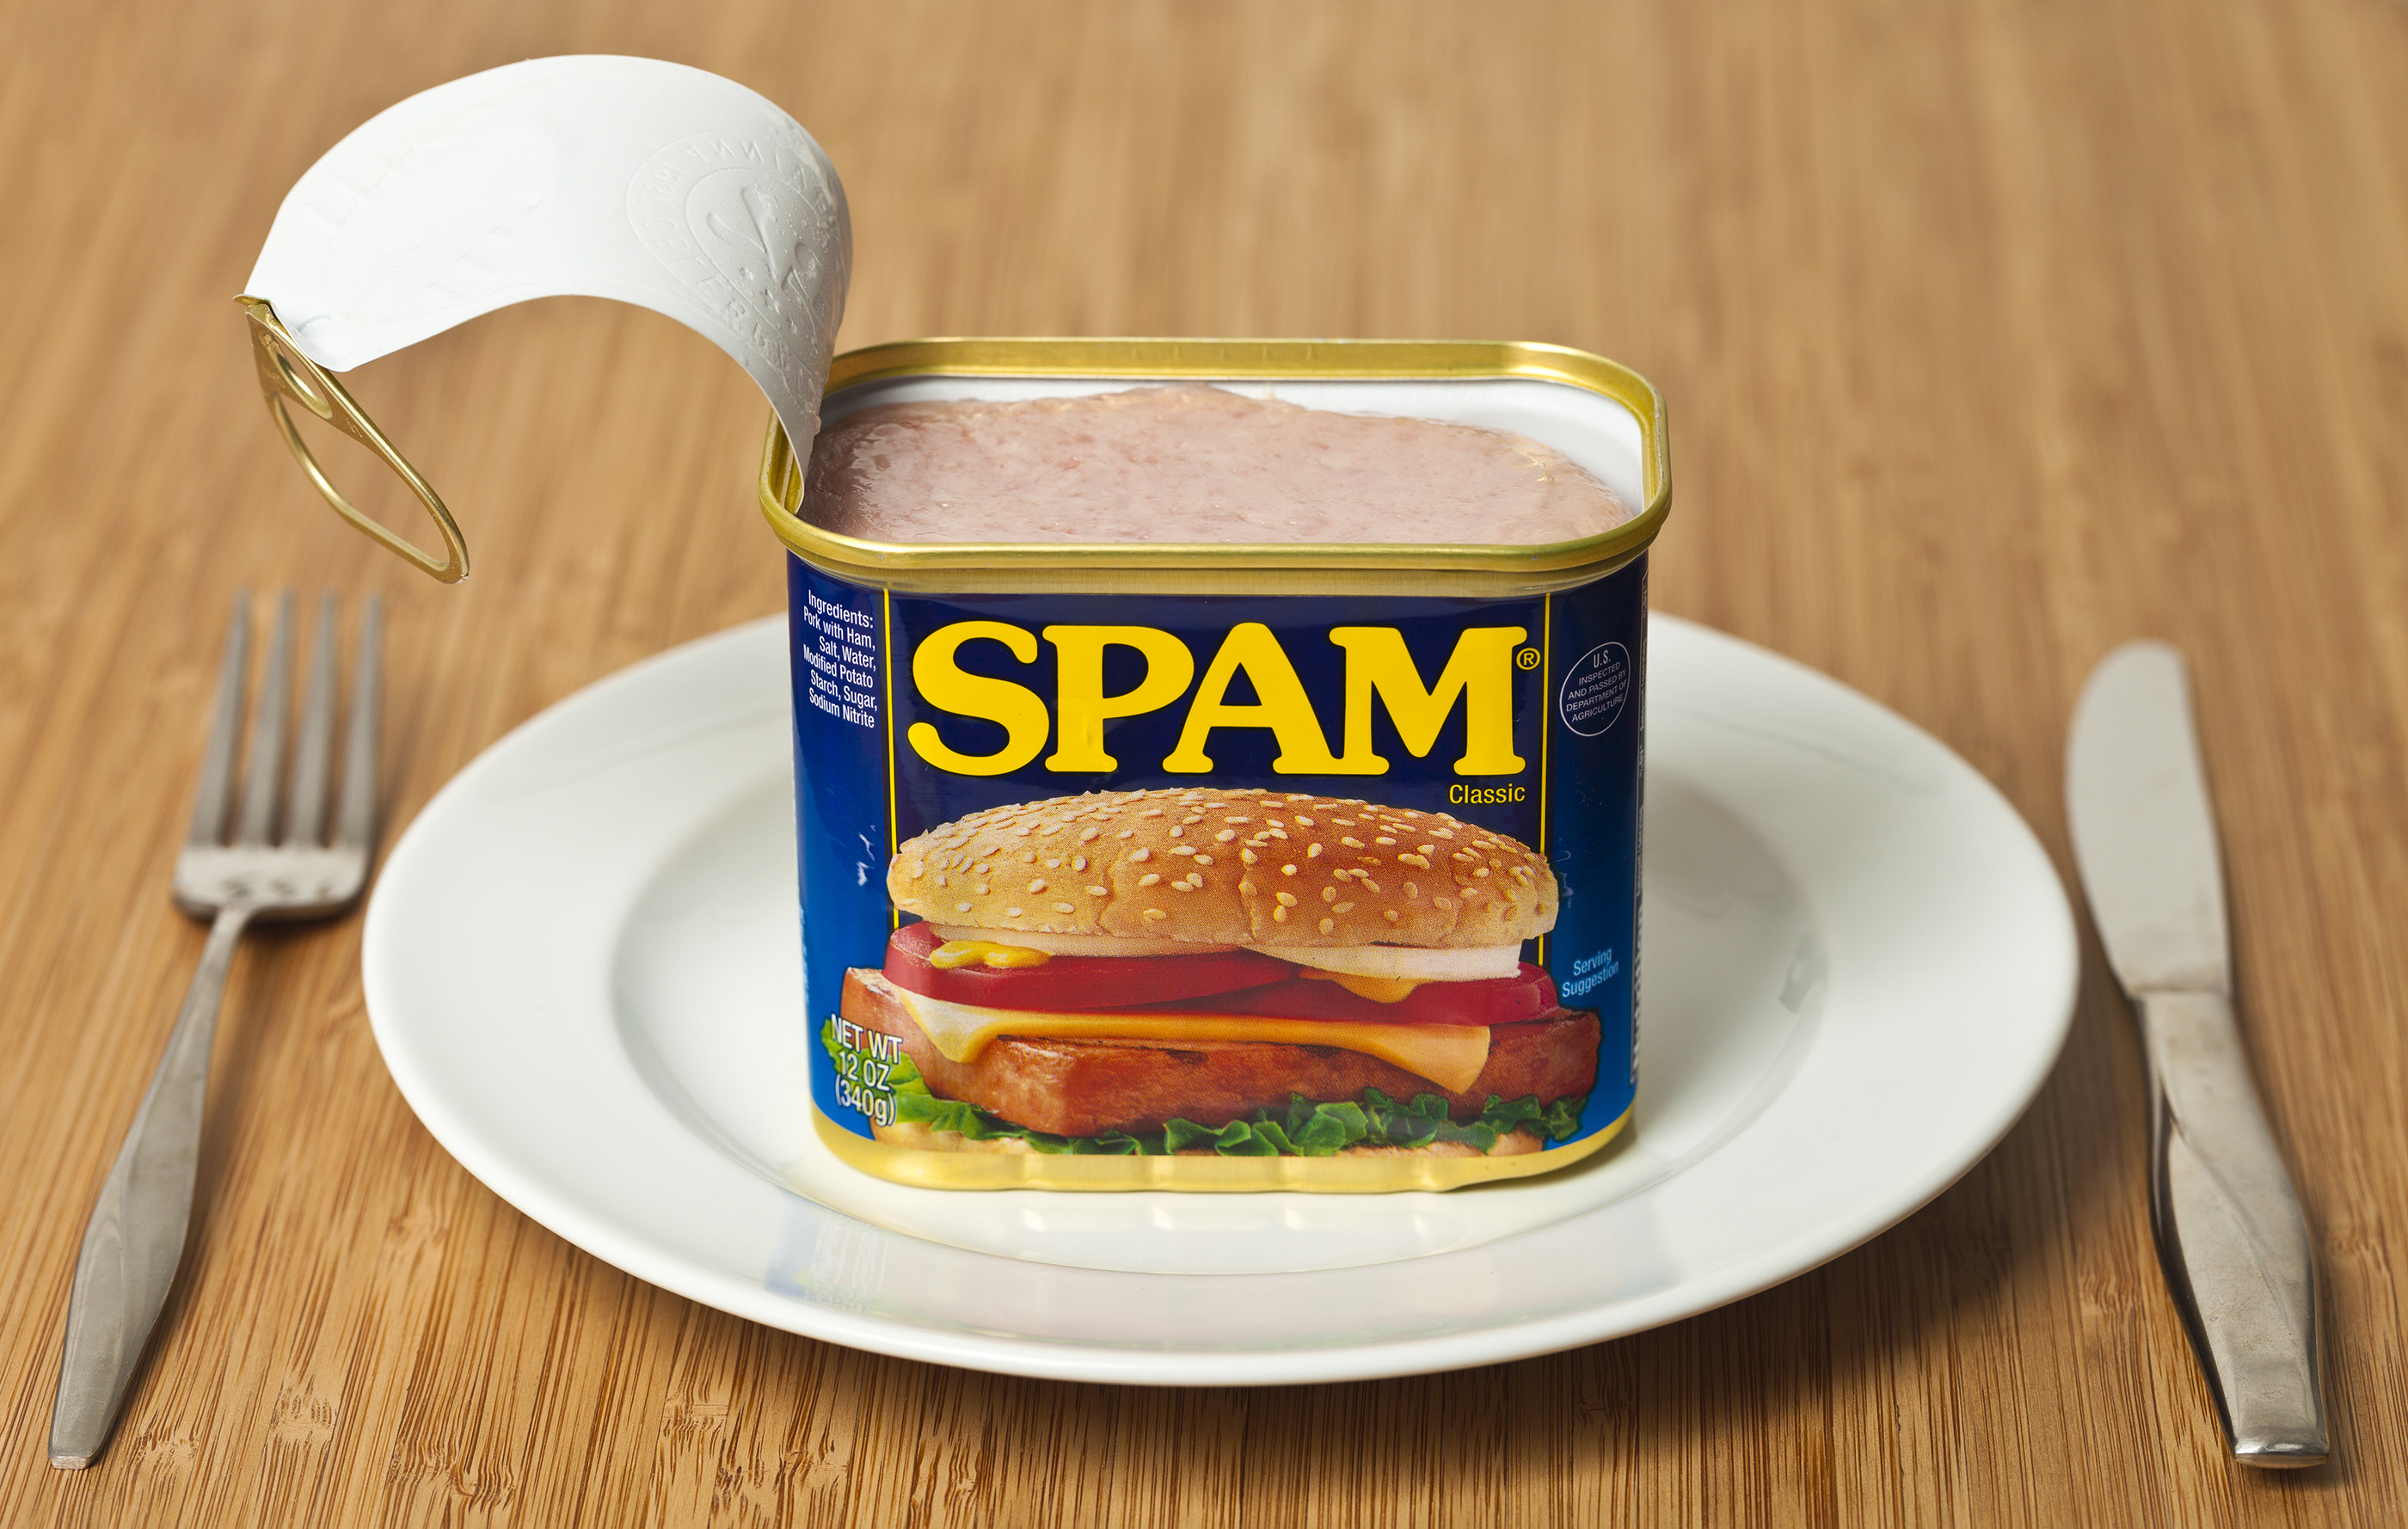 A can of Spam on a plate.